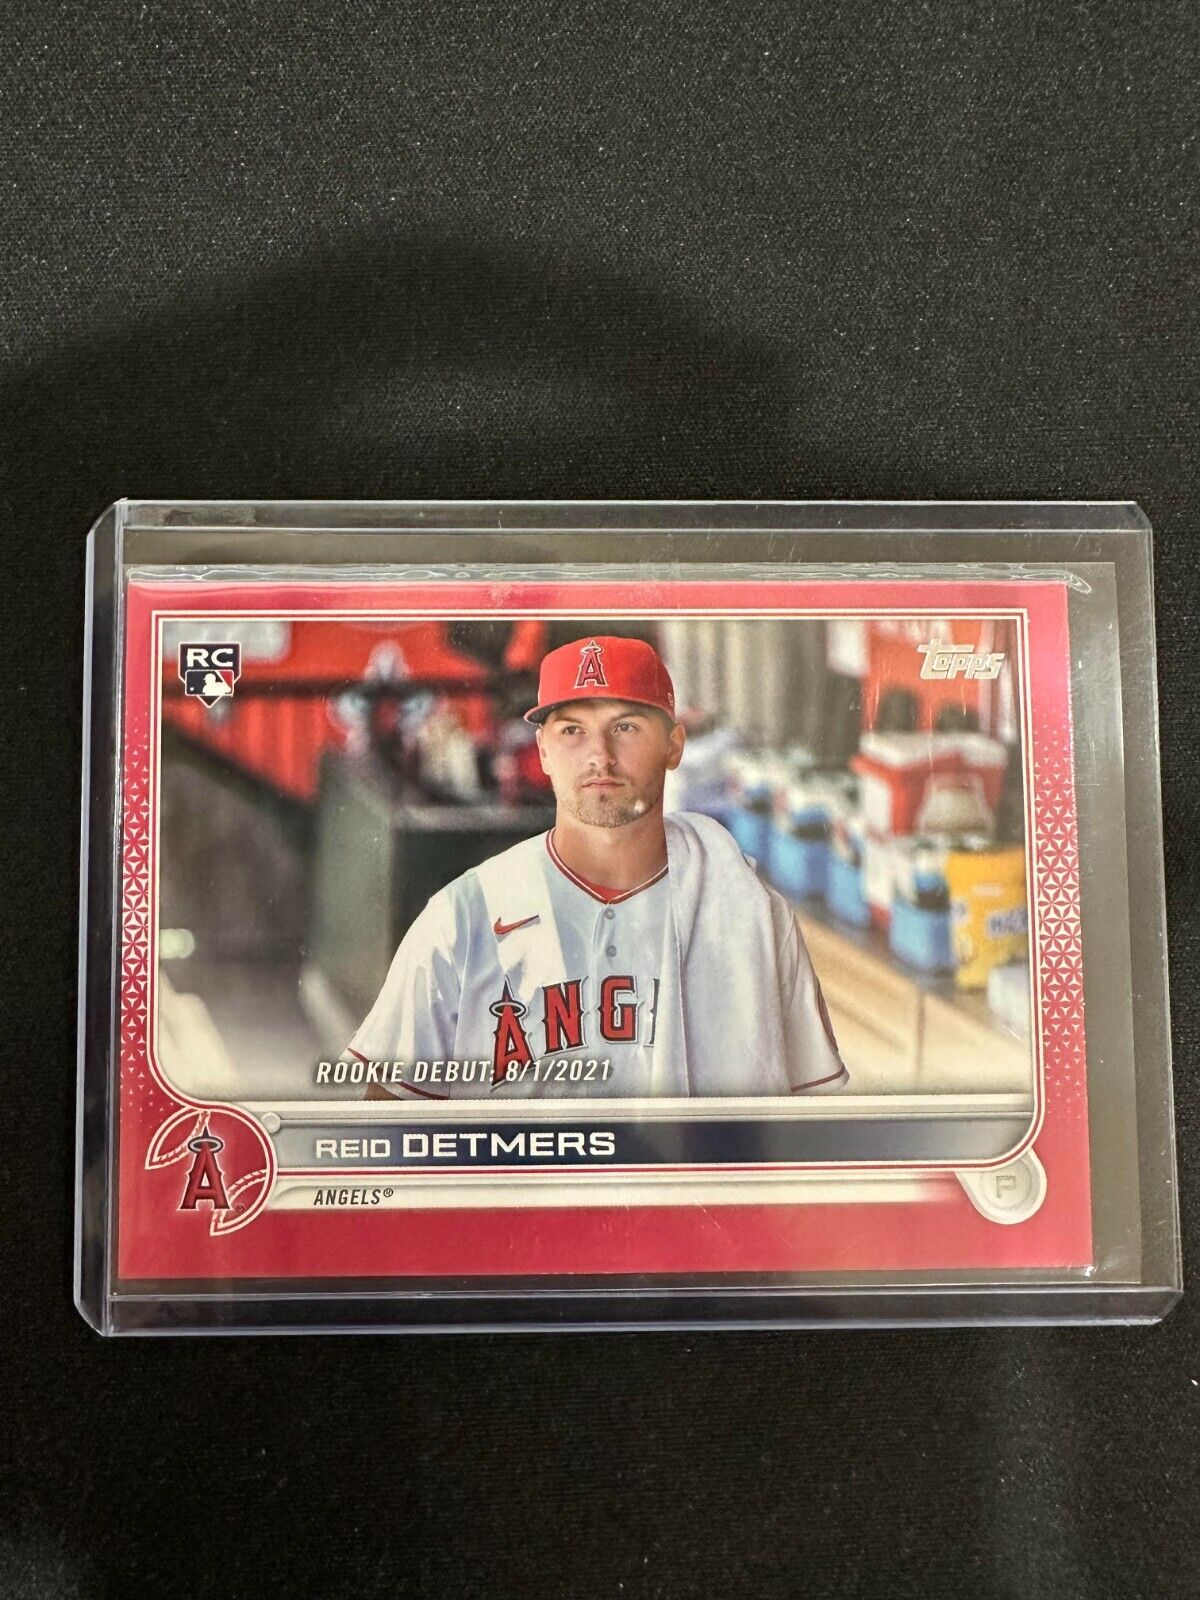 2022 Topps Update Debut Mother's Day Hot Pink /50 Reid Detmers Rookie RC SP ACE